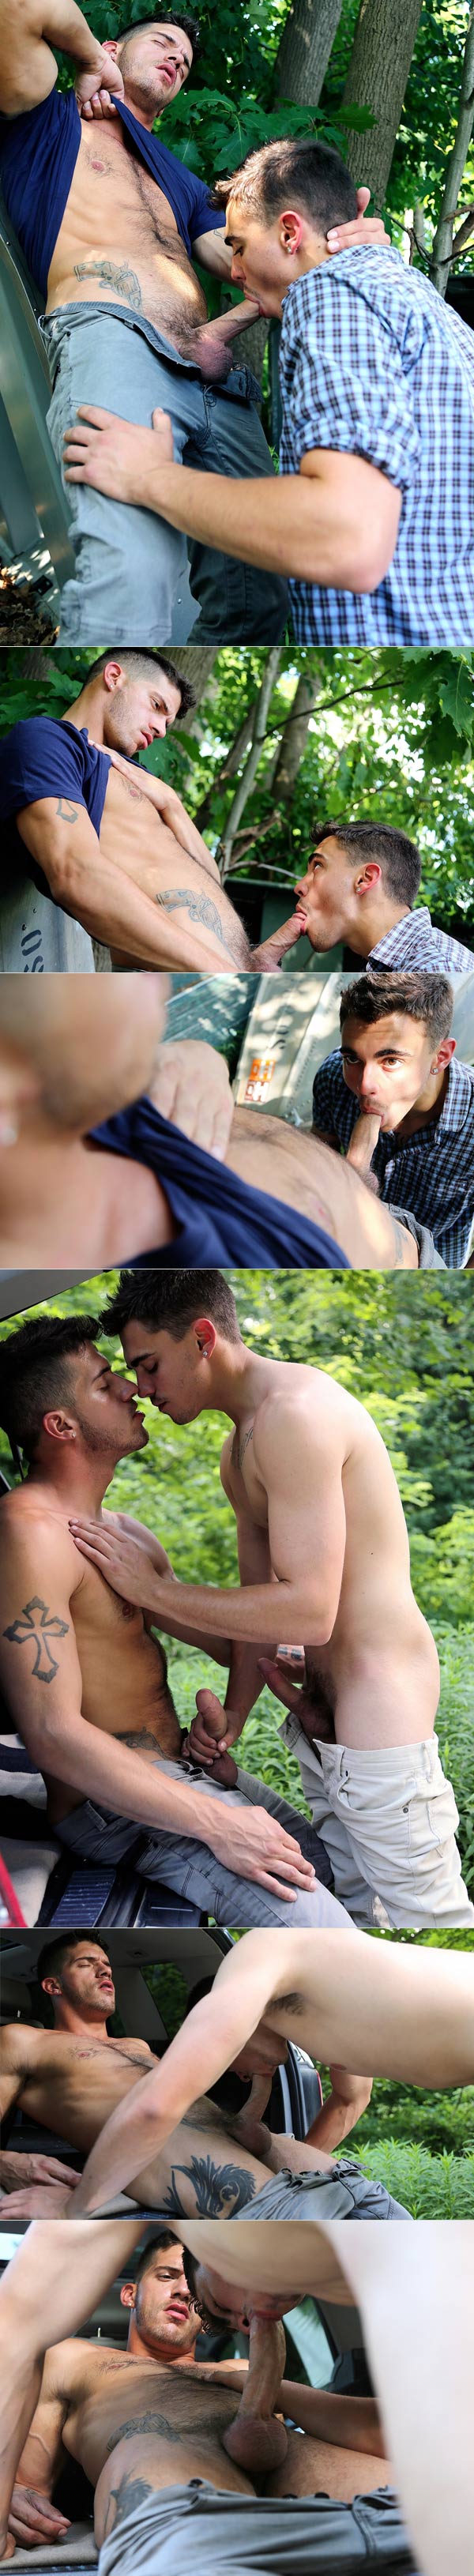 Ty Roderick & Asher Hawk at CockyBoys.com